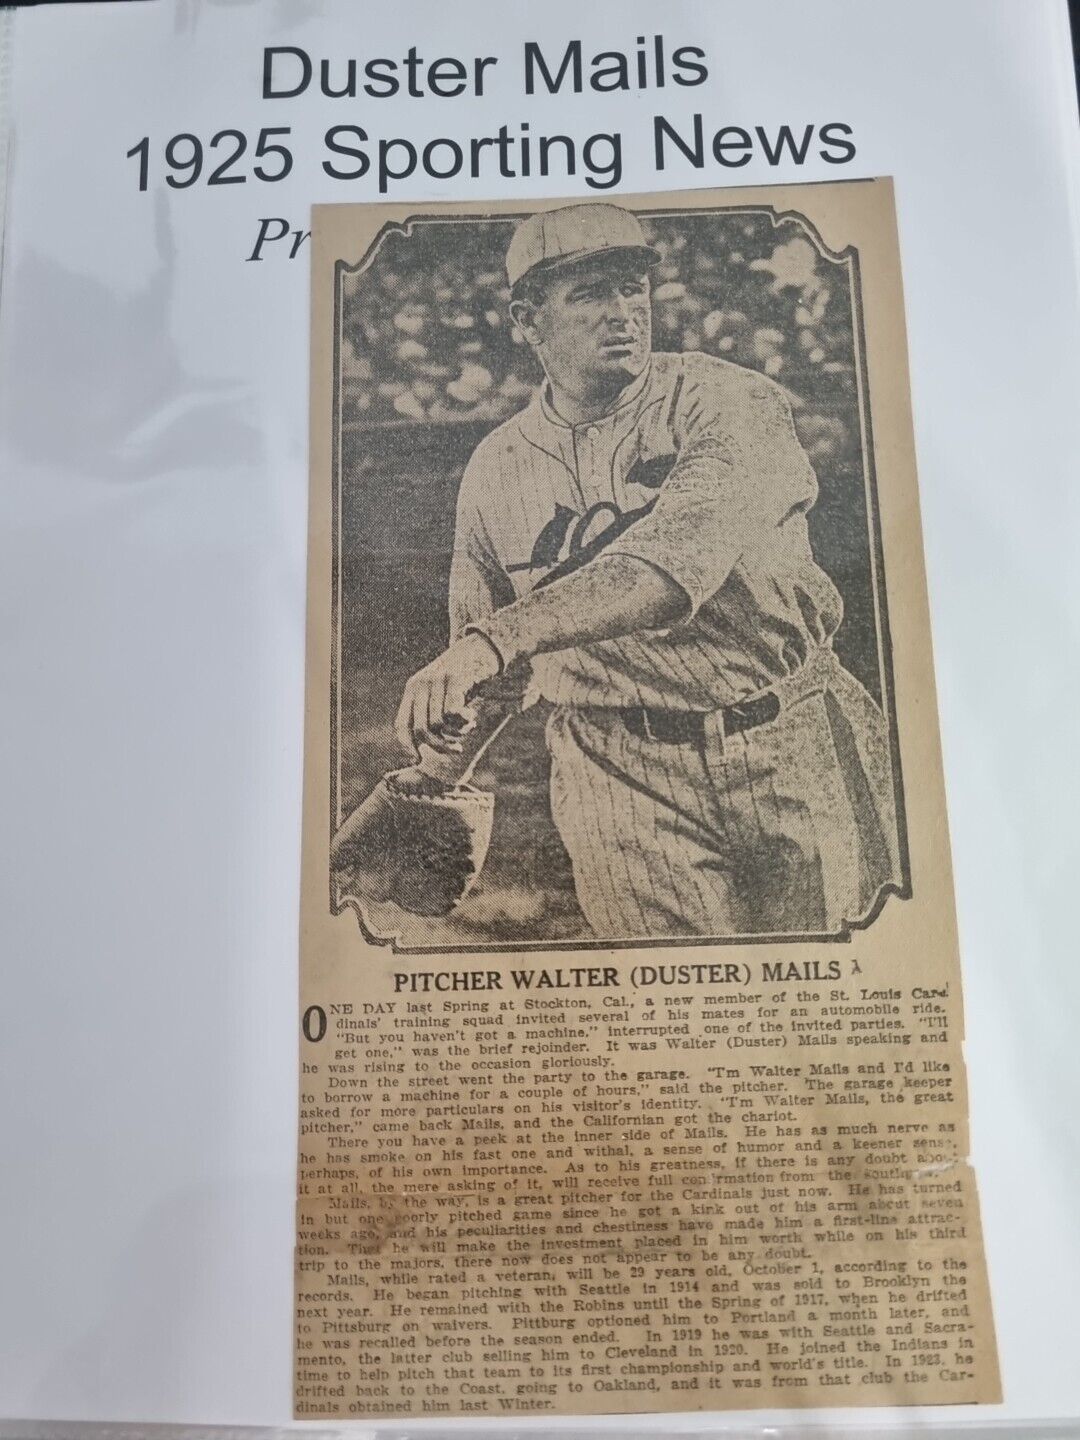 Duster Mails 1925 Sporting News Vintage Baseball Newspaper Clip